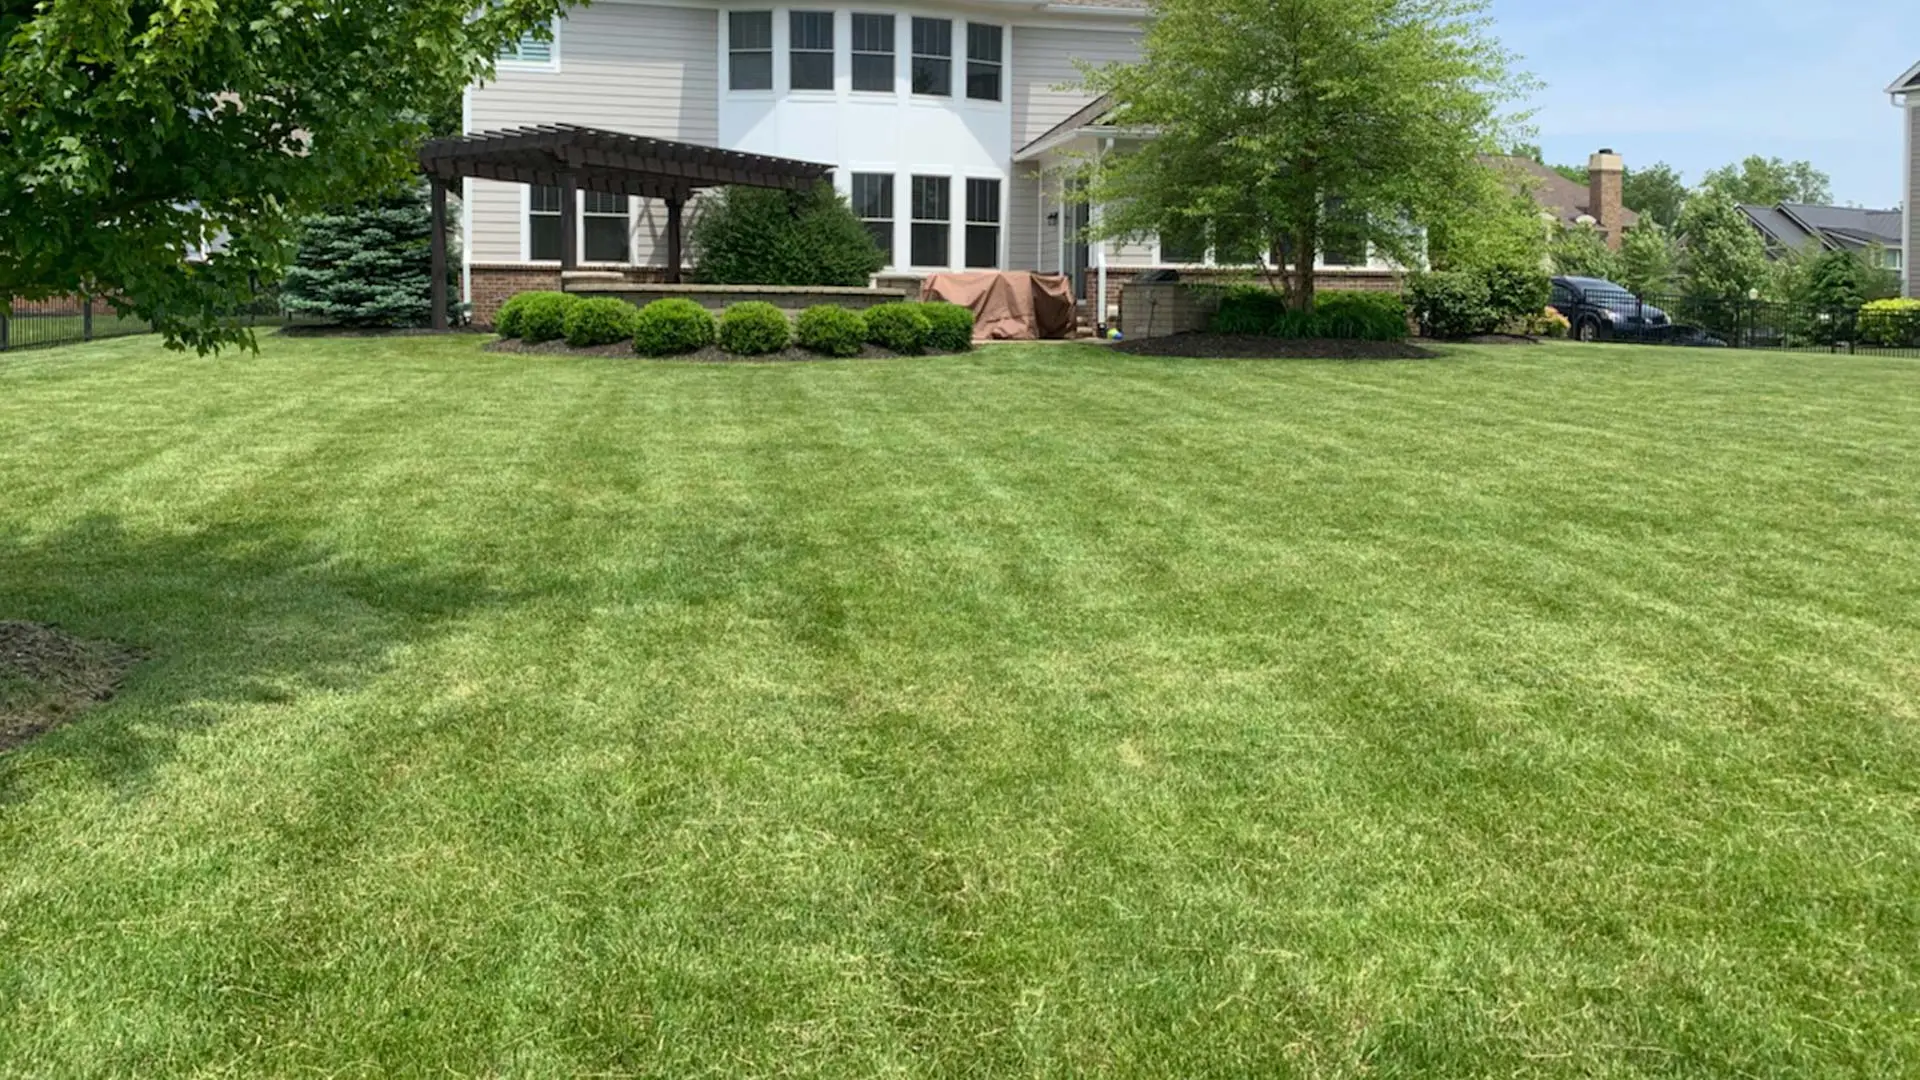 Noblesville customer with a lawn freshly mowed by Spider Lawn & Landscape.